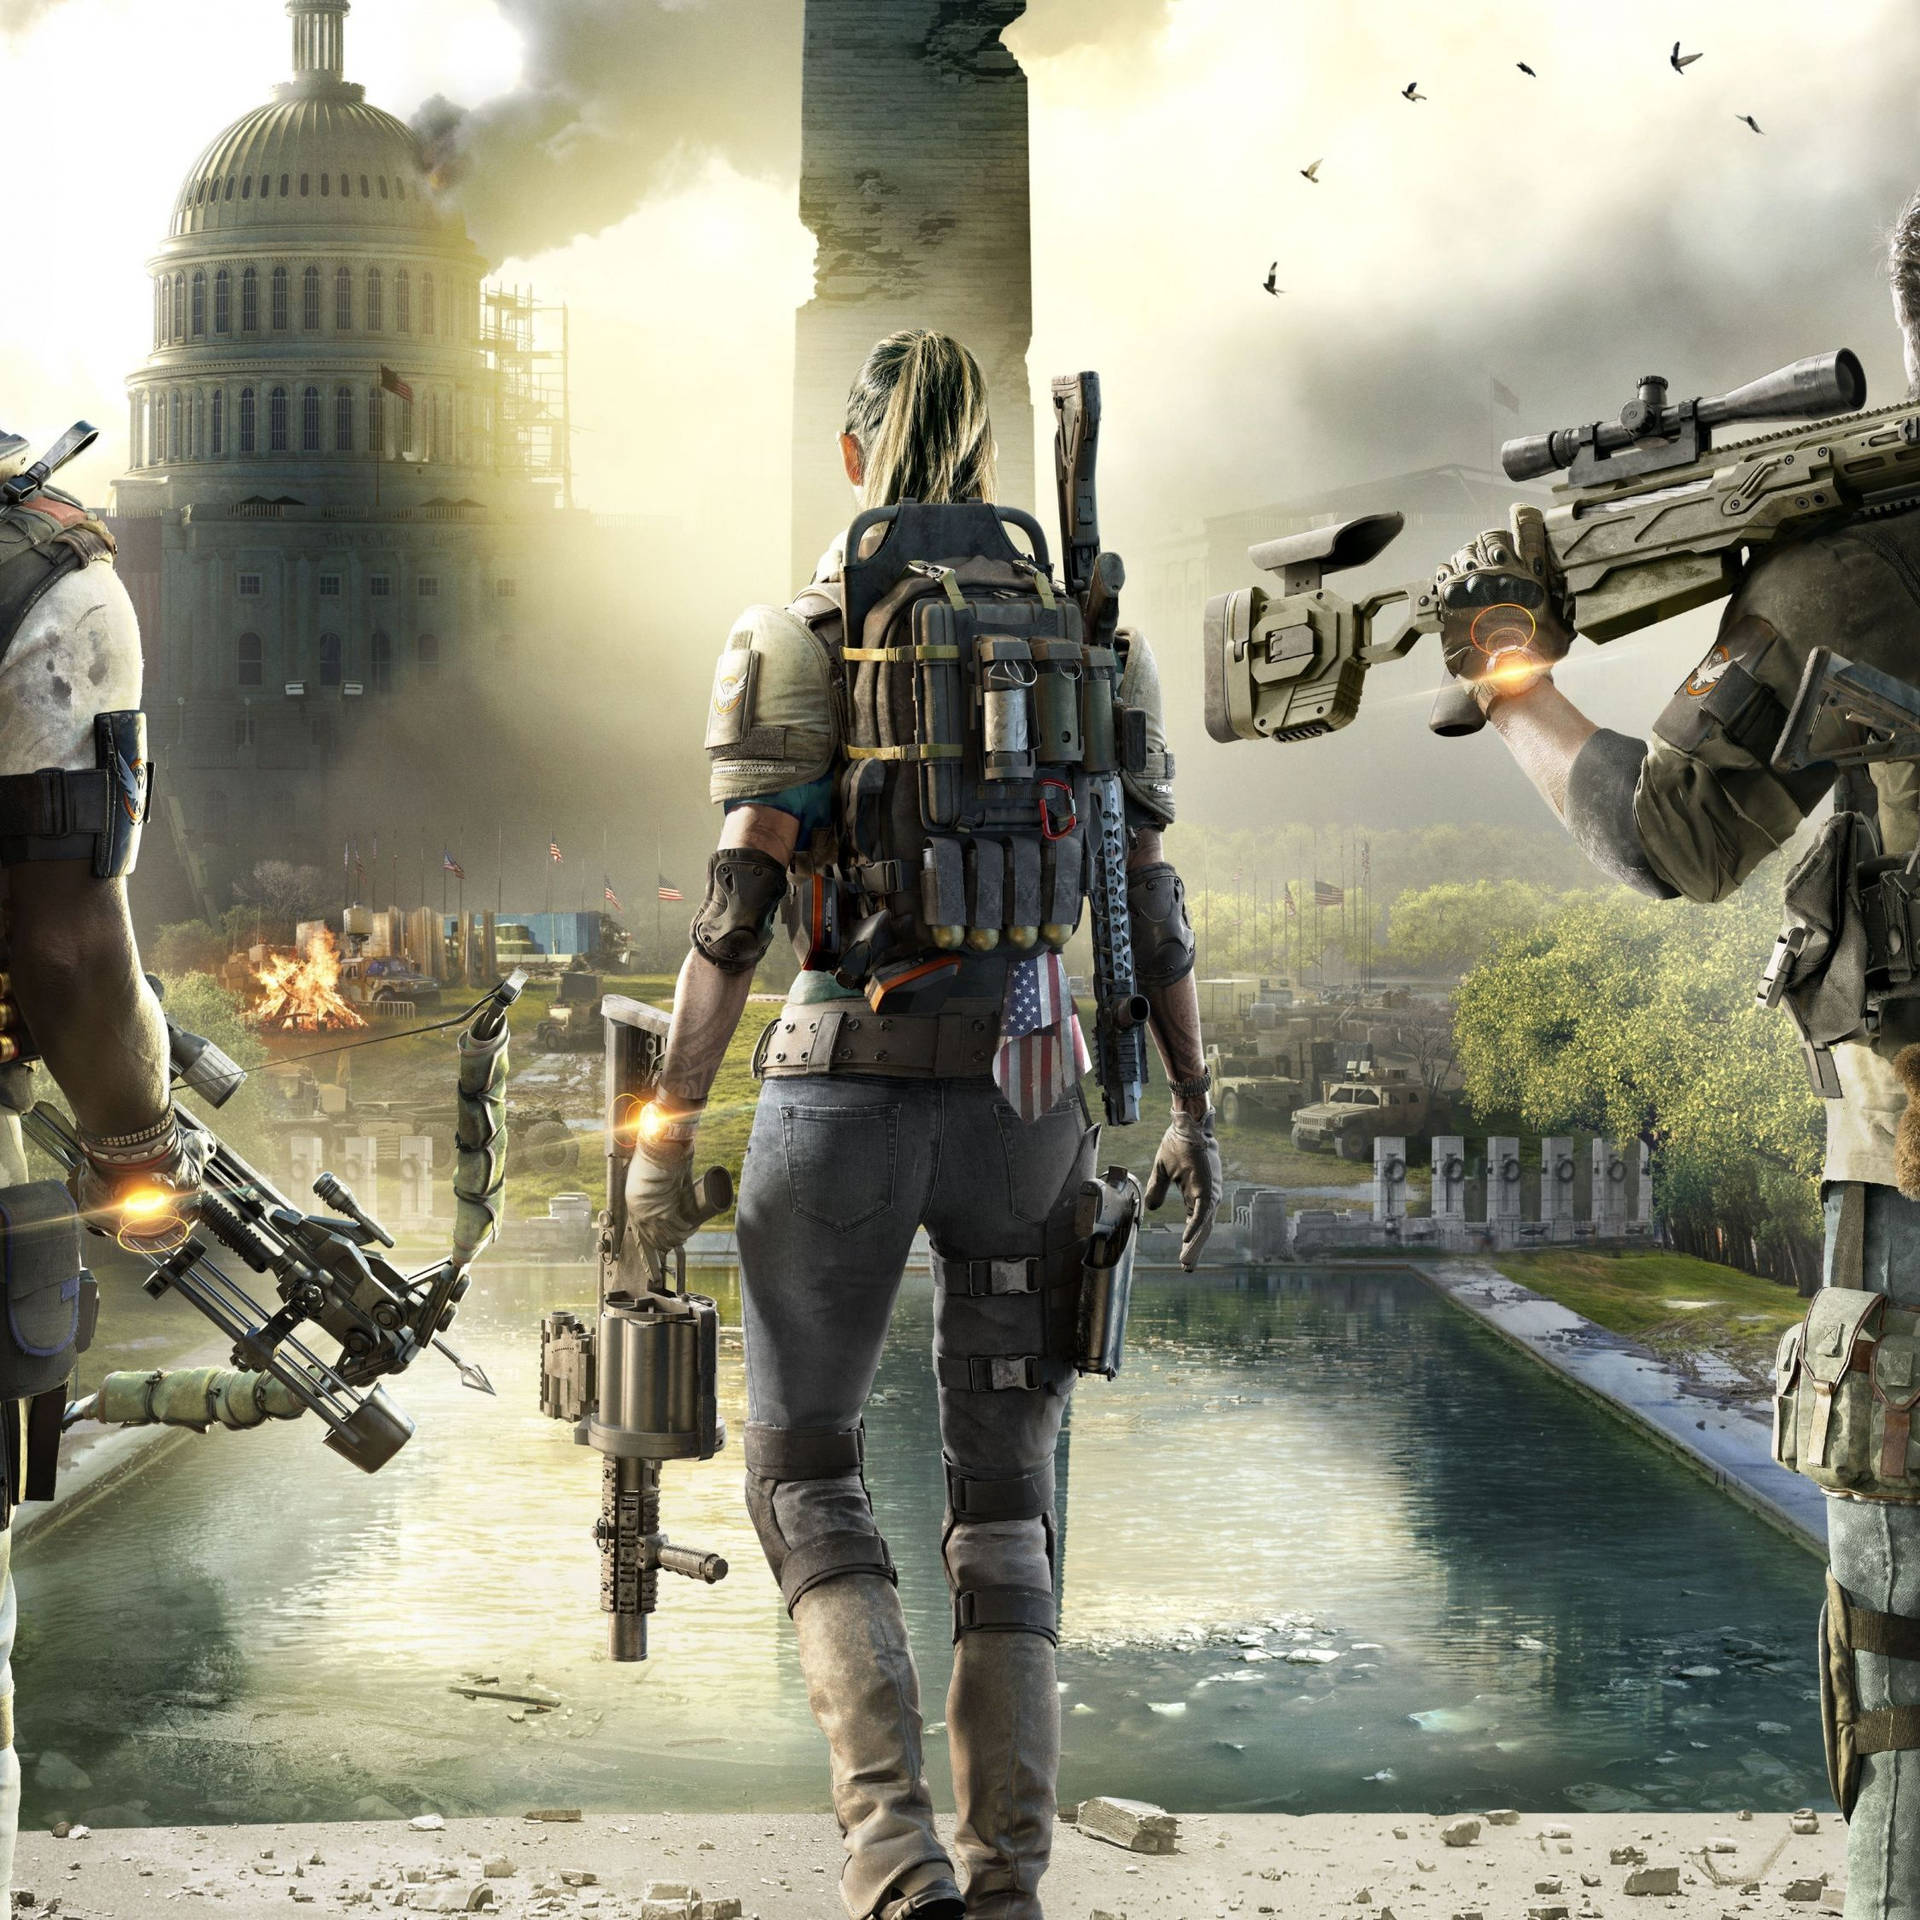 Survive an apocalyptic world in The Division 2 Wallpaper